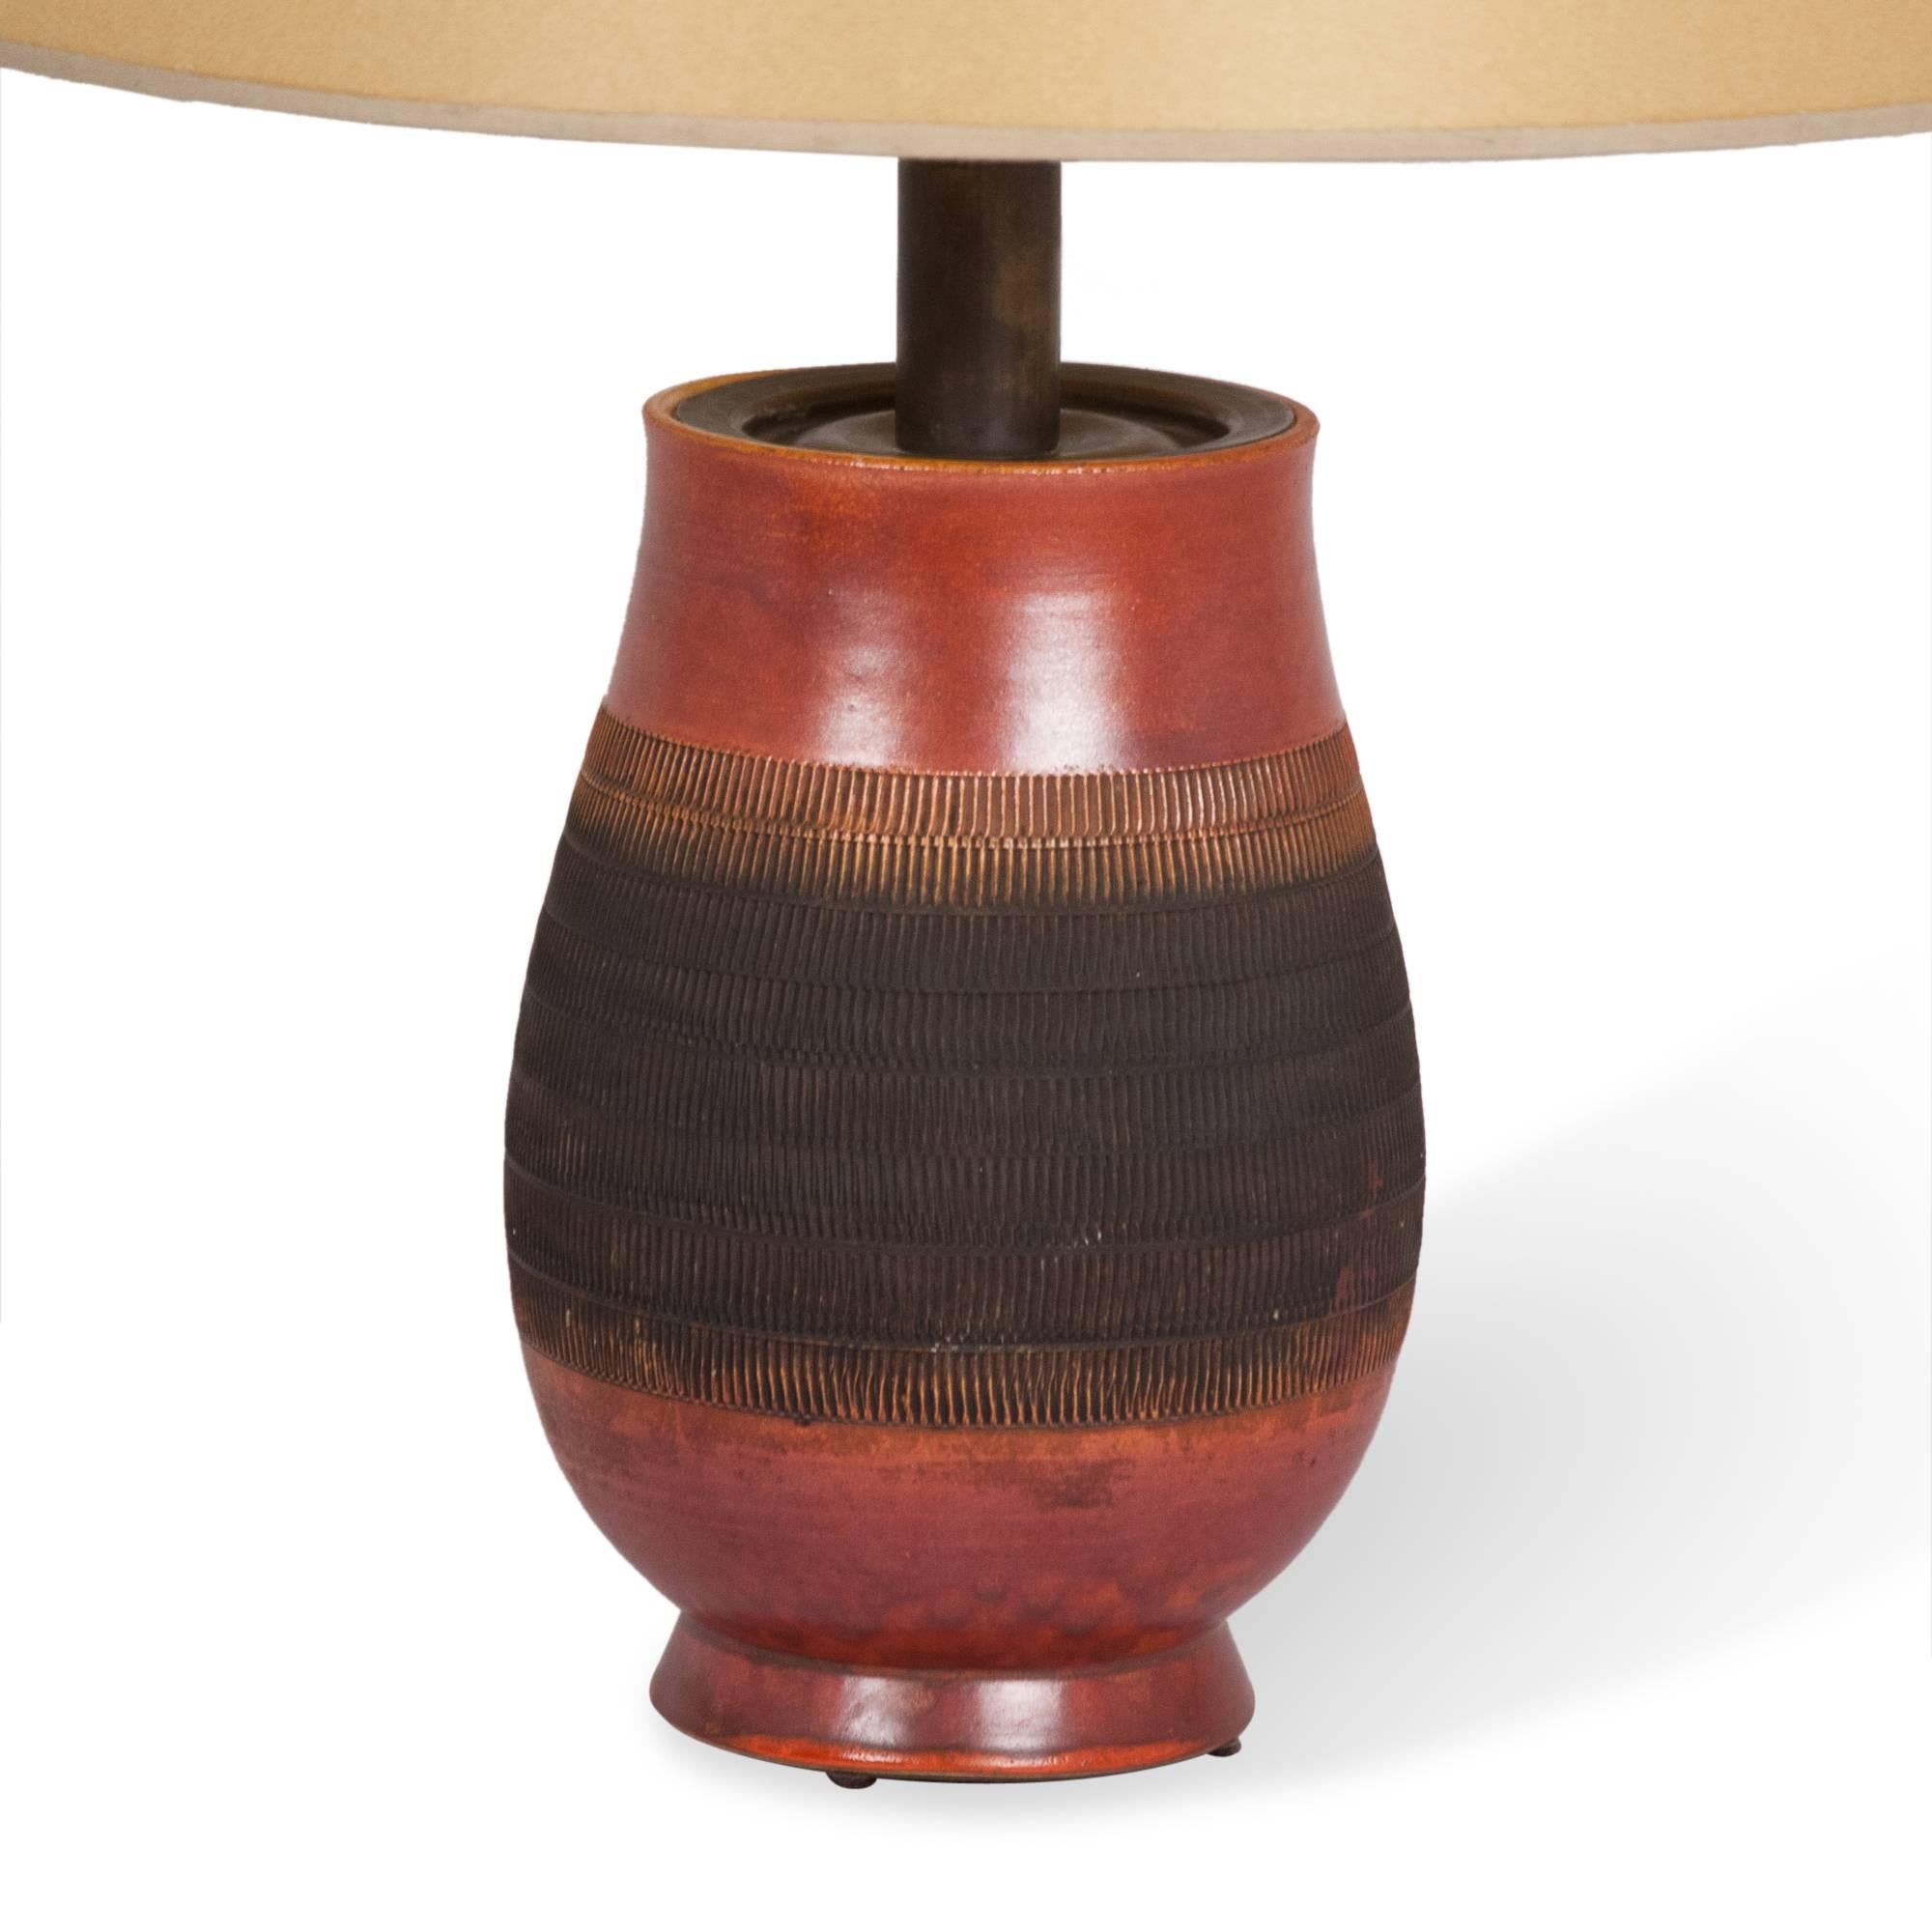 Ceramic table lamp, dark red glazed with wide textured band, French, 1930s. Measures: Overall height 21 in, diameter of shade 13 in, diameter of base 6 in.
 